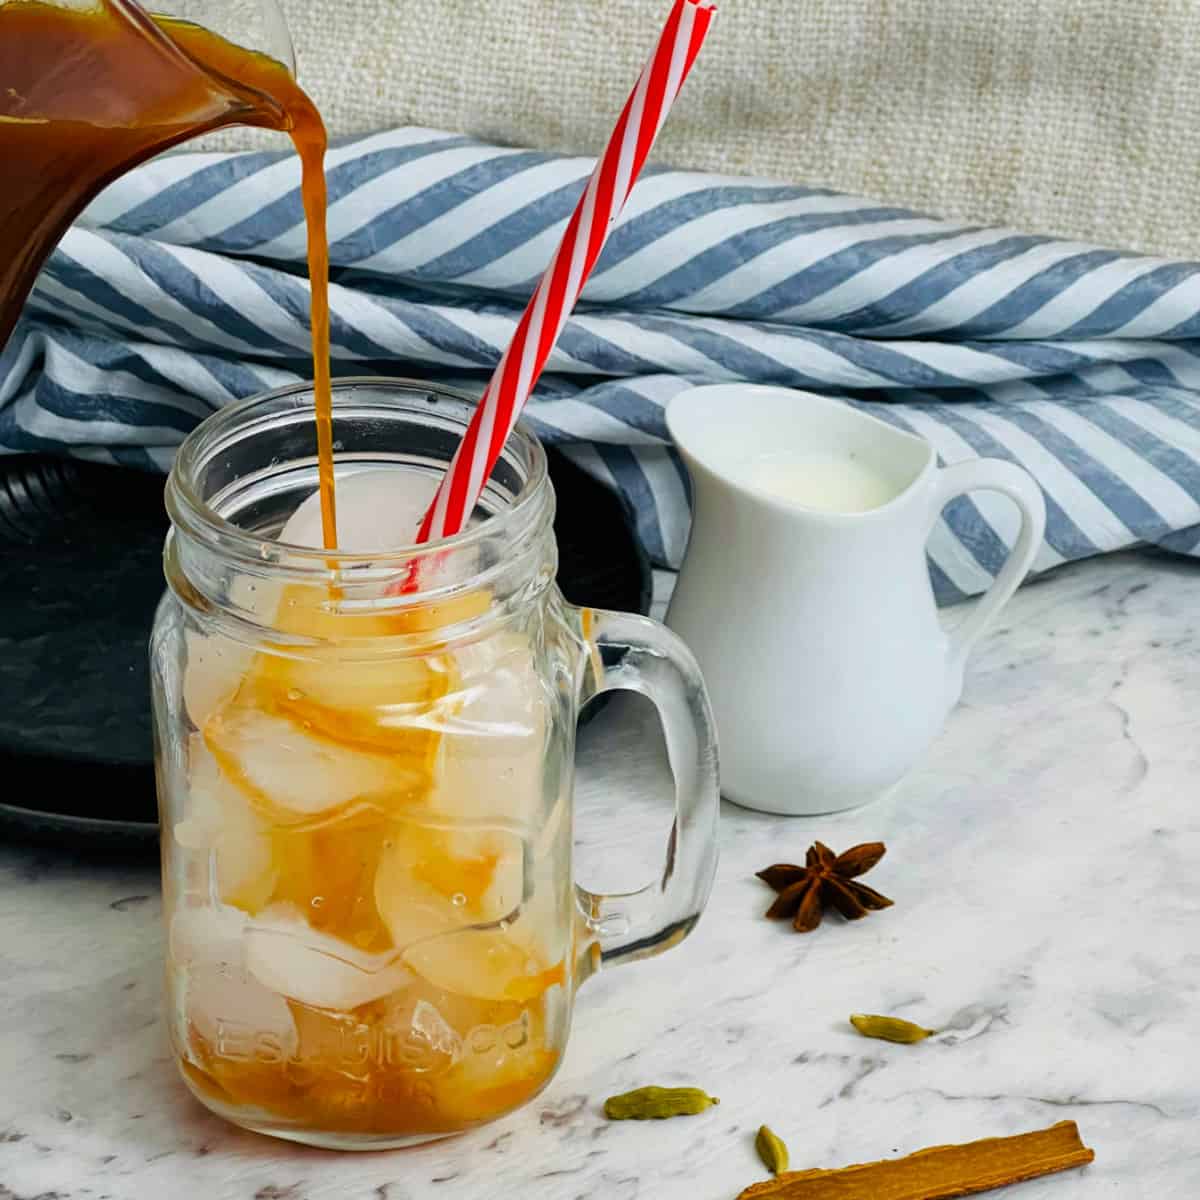 Step showing adding chai concentrate on ice cubes placed in a glass mug.